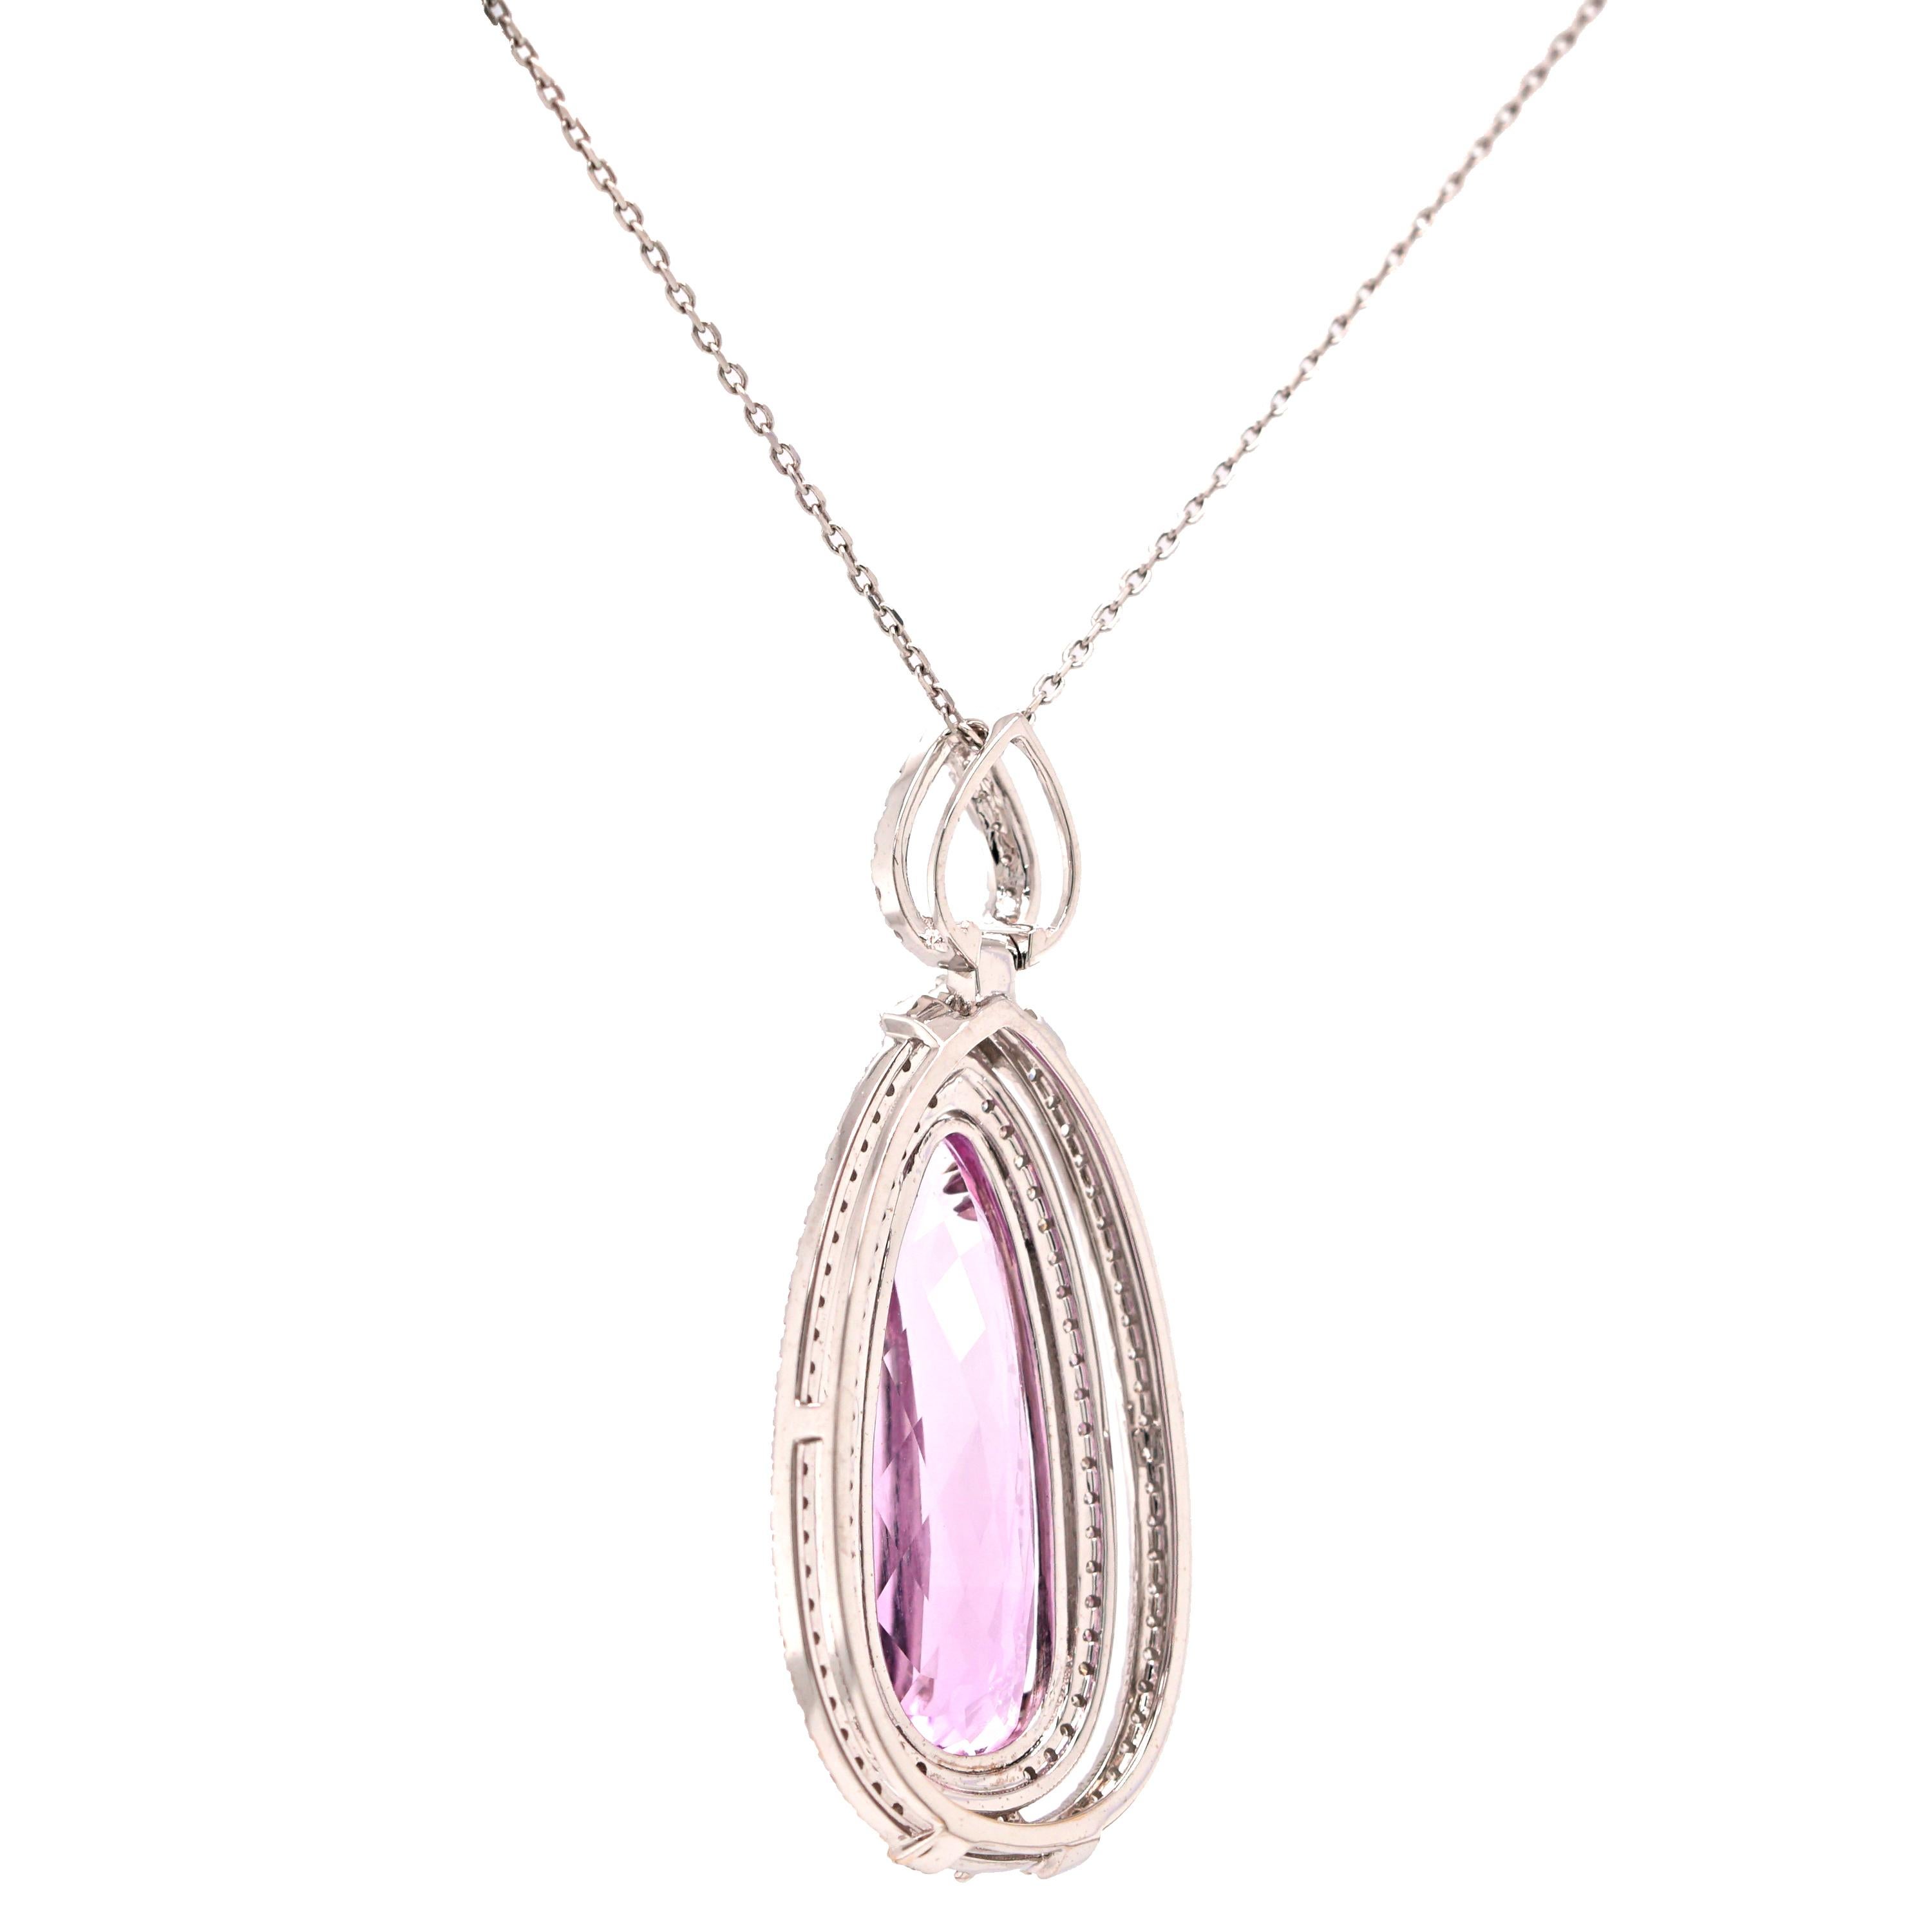 Description:
Pretty pink kunzite pendant totalling 8.85ct in weight, bordered by two diamond-set halos which suspend from a teardrop diamond-set bail.
- Weight: 7gm
- Size (HxW): 39 x 16 x 7mm
- Chain: 18ct white gold, 16 inches + 2-inch